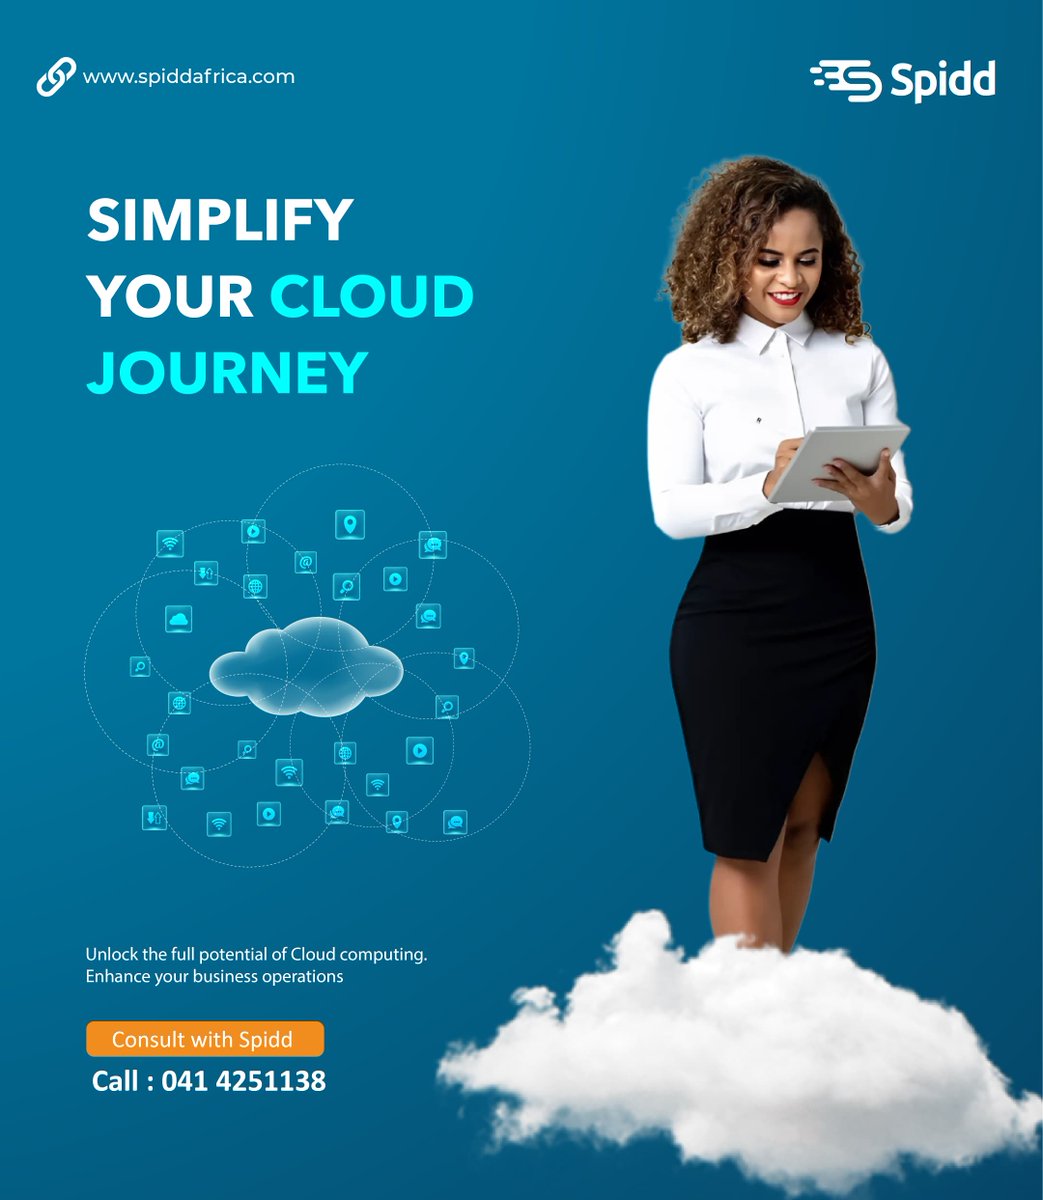 Unlock your business potential with Spidd's cloud services! Seamlessly deploy in any cloud environment. Visit spiddafrica.com or call 0414251138. #CloudComputing #BusinessGrowth